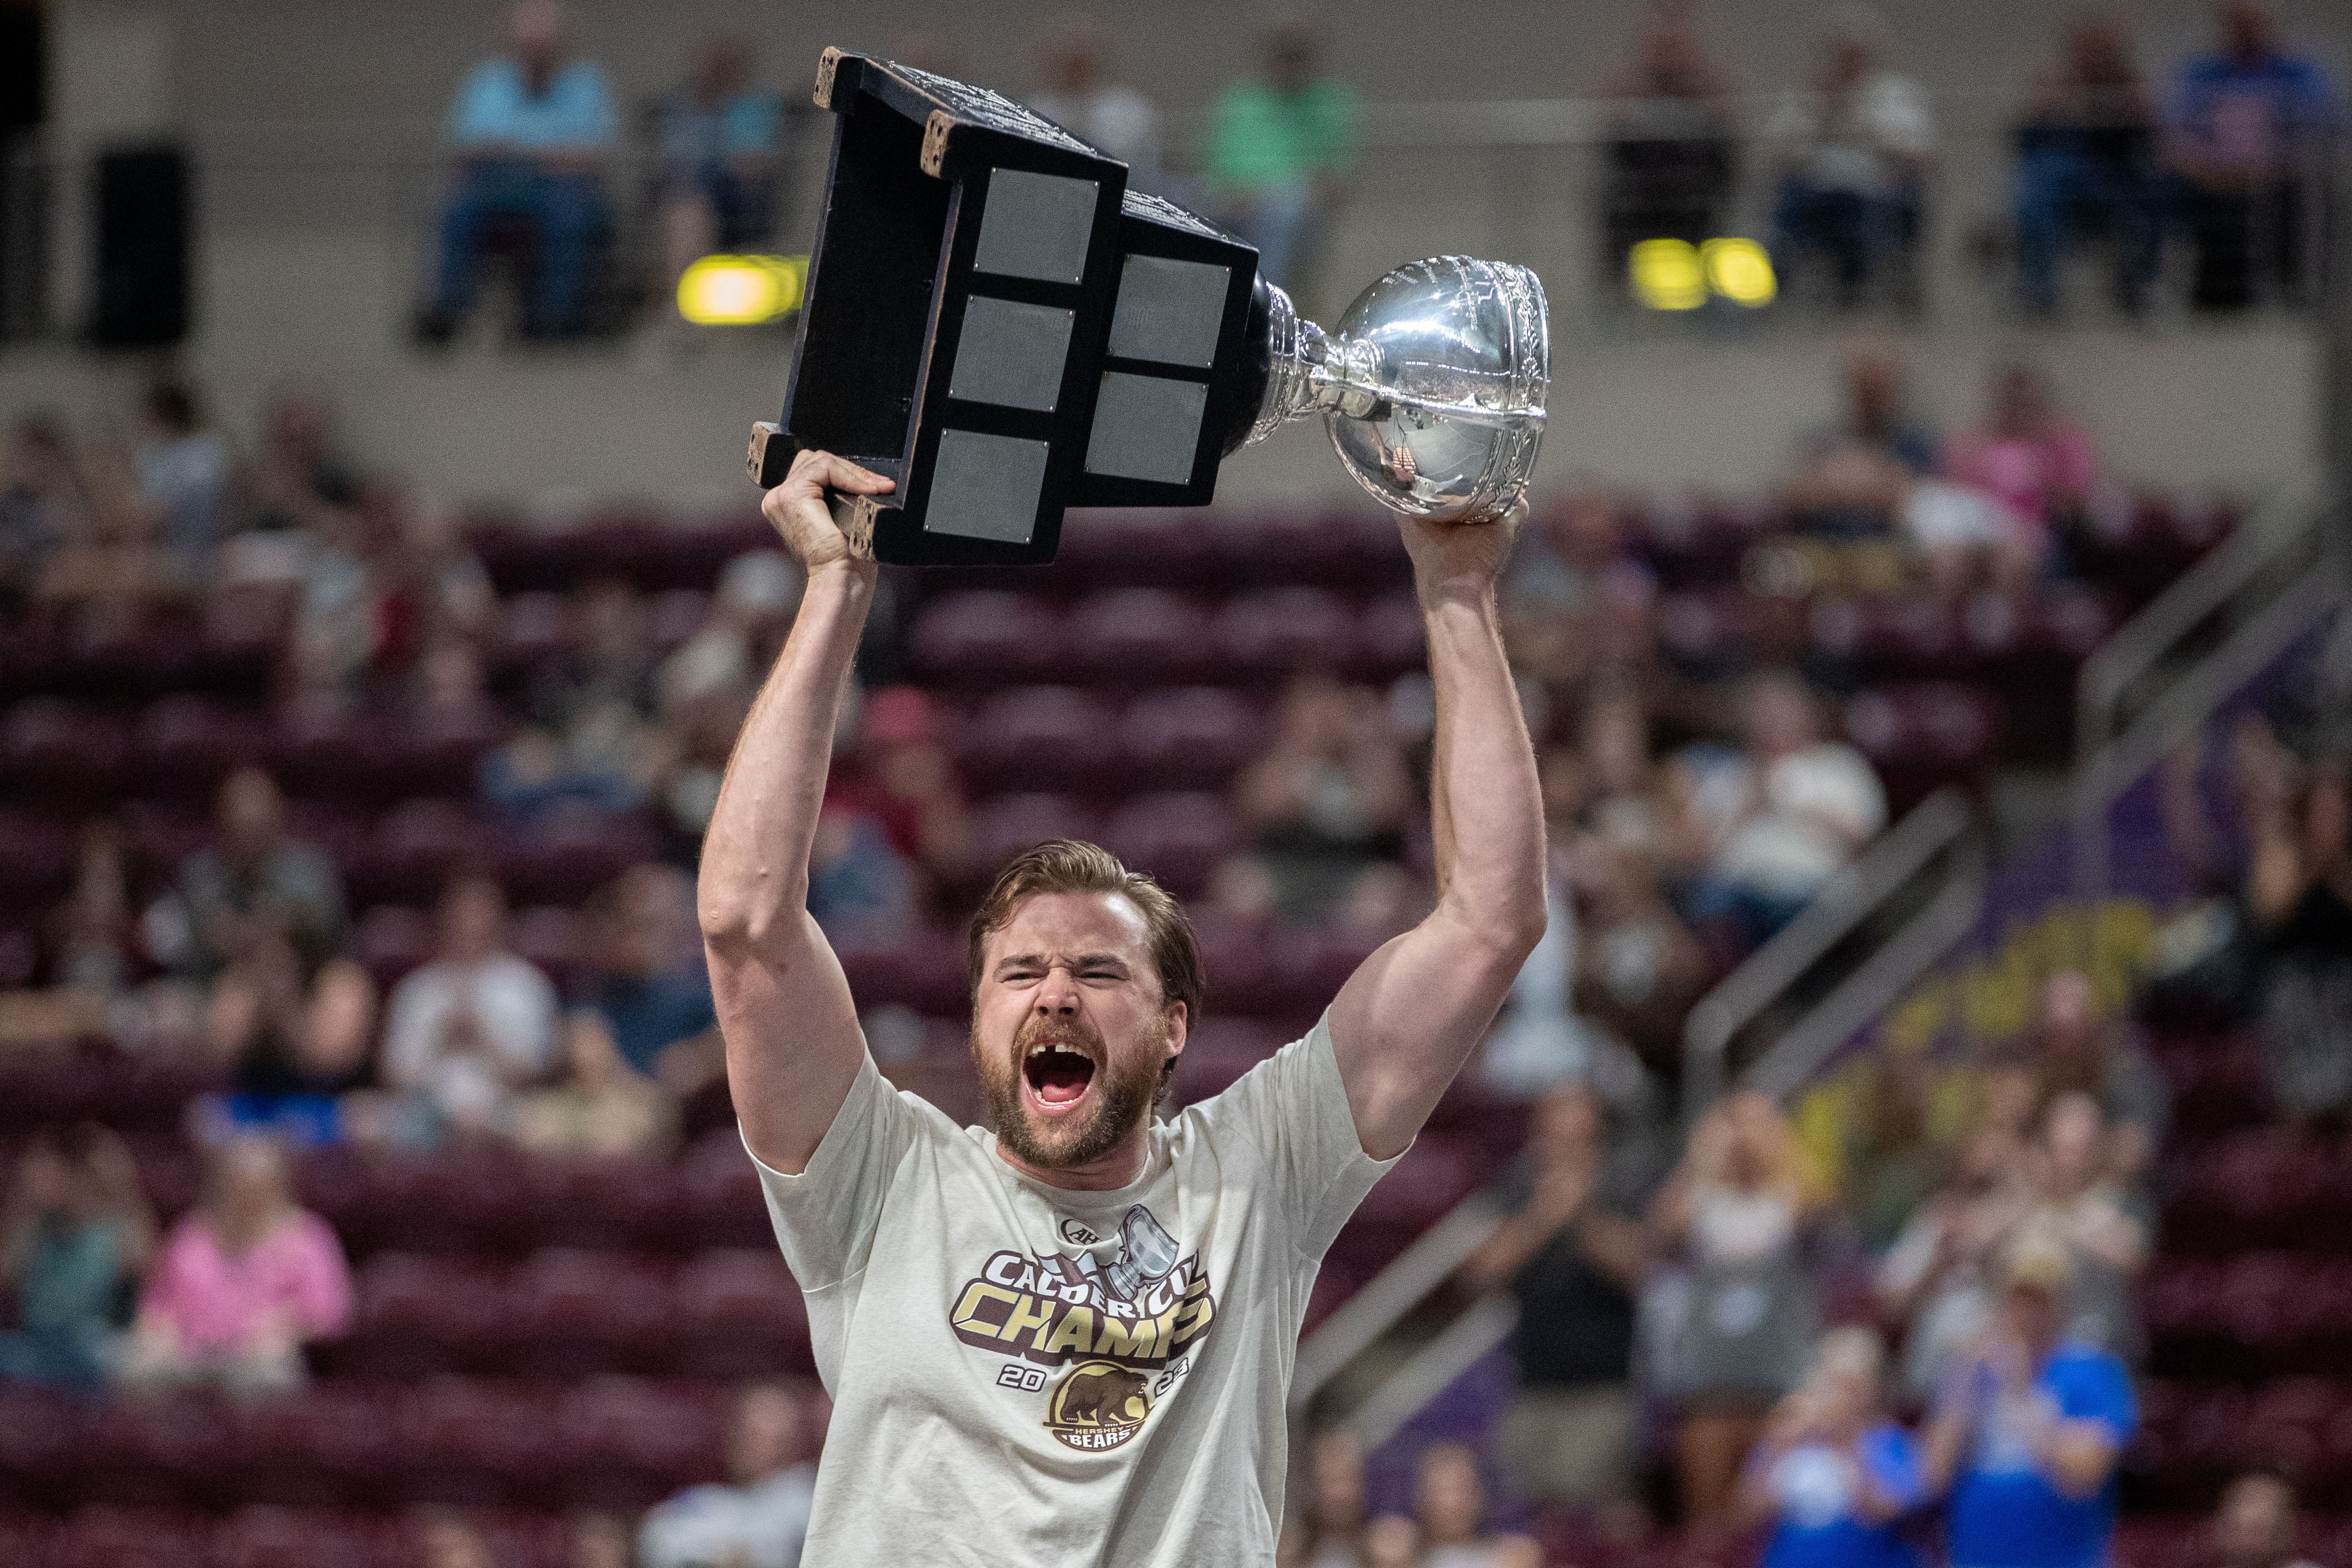 Hershey Bears win 12th Calder Cup in thrilling overtime Game 7 victory over  Coachella Valley Firebirds